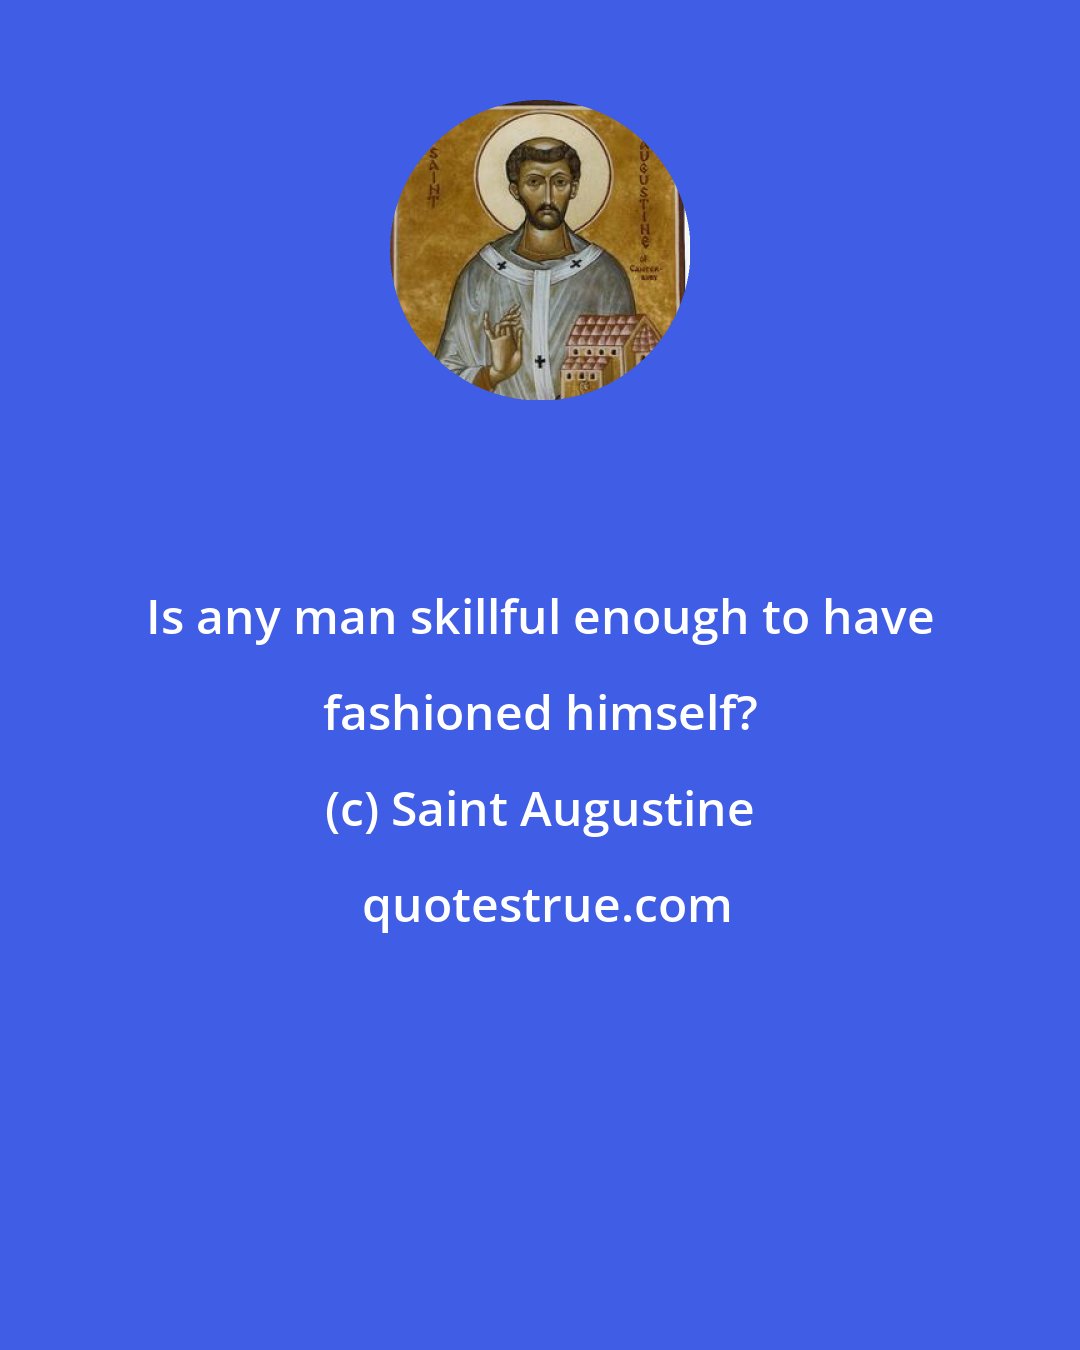 Saint Augustine: Is any man skillful enough to have fashioned himself?